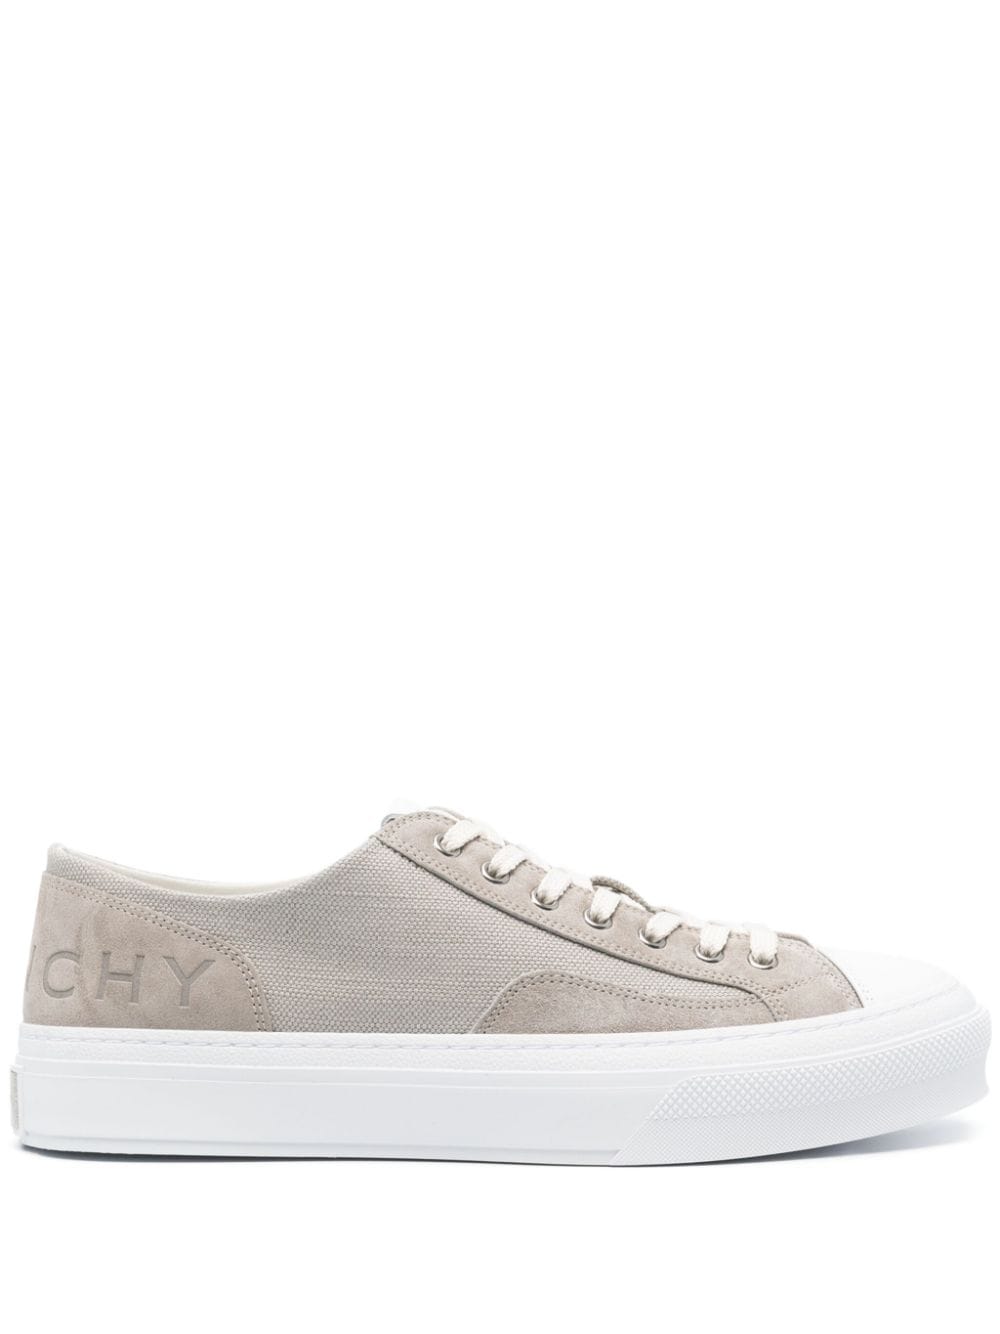 Givenchy City low-top sneakers - Grey von Givenchy